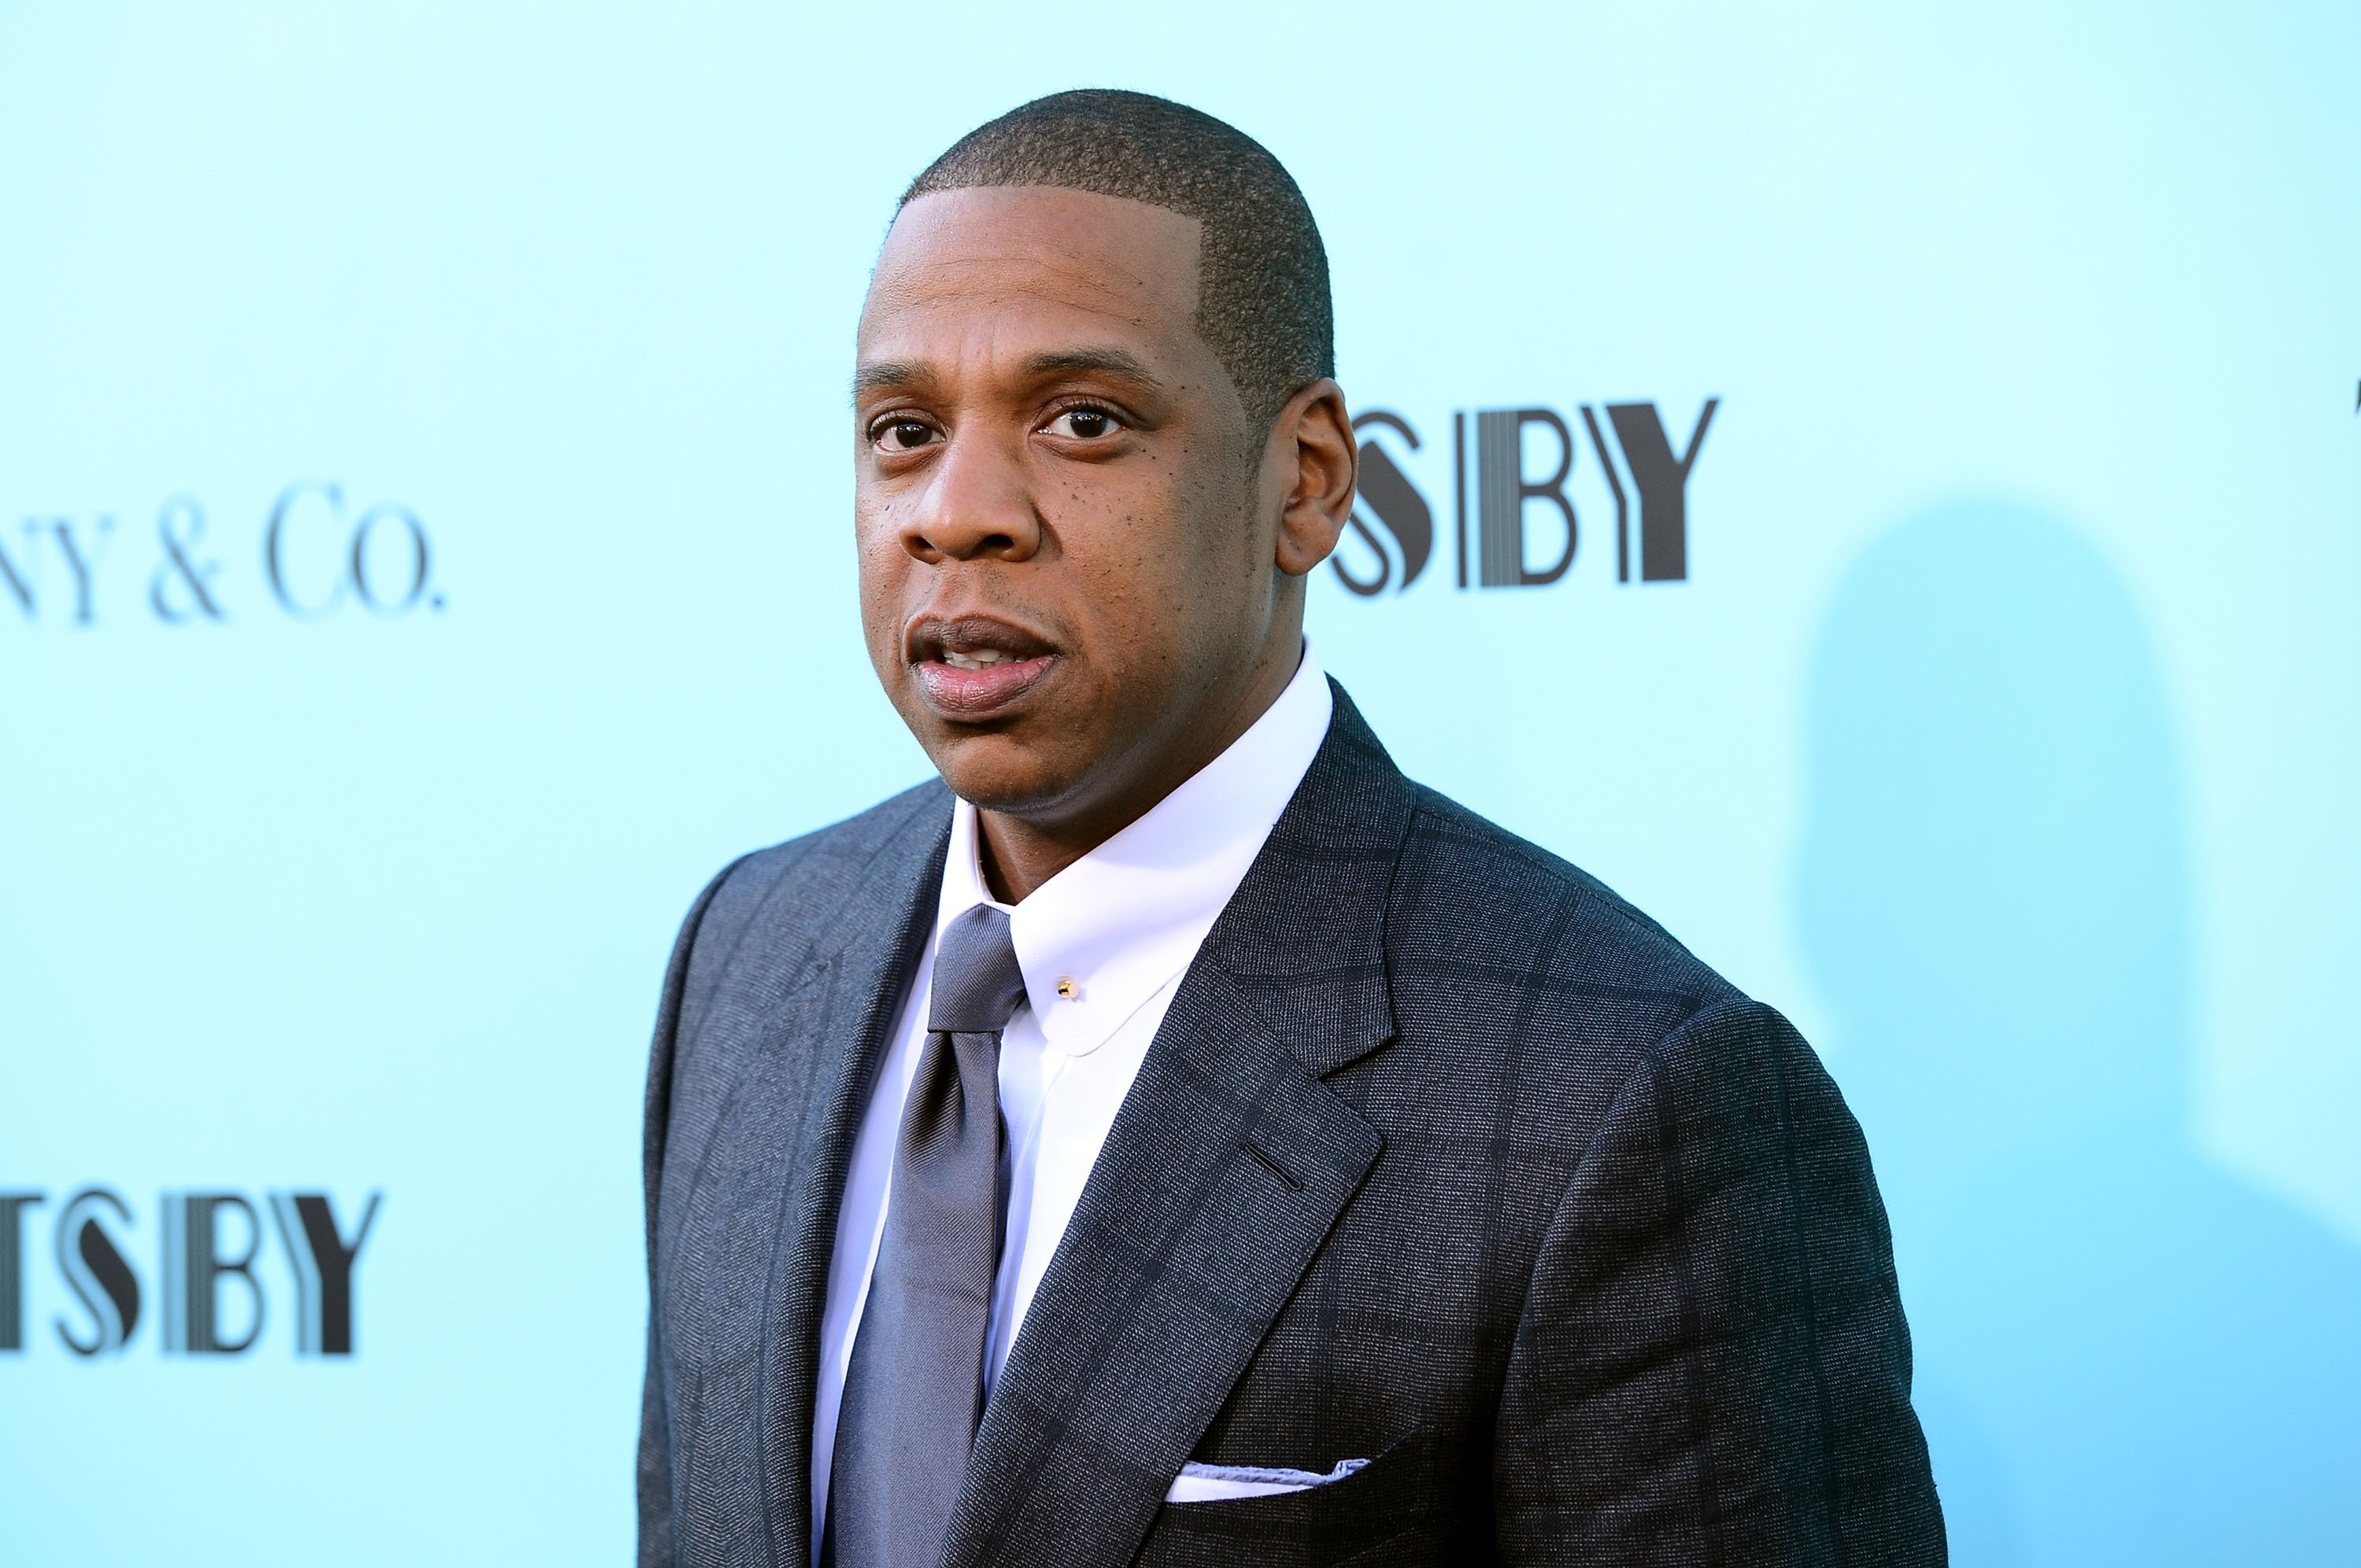 Jay-Z attends the "The Great Gatsby" world premiere on May 1, 2013. | Photo: GettyImages